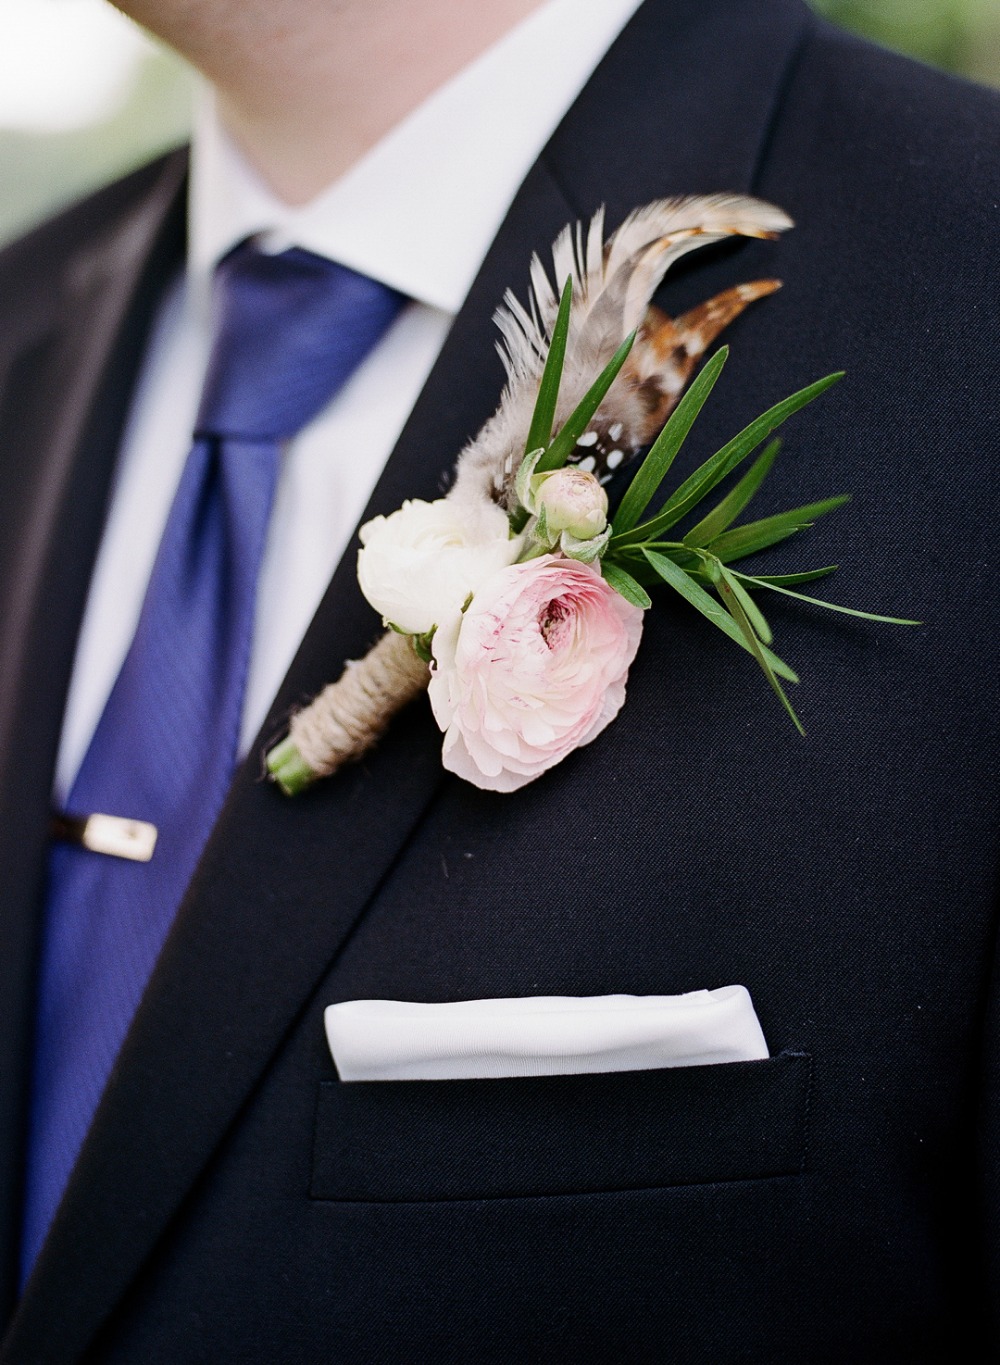 Owl feather boutonniere